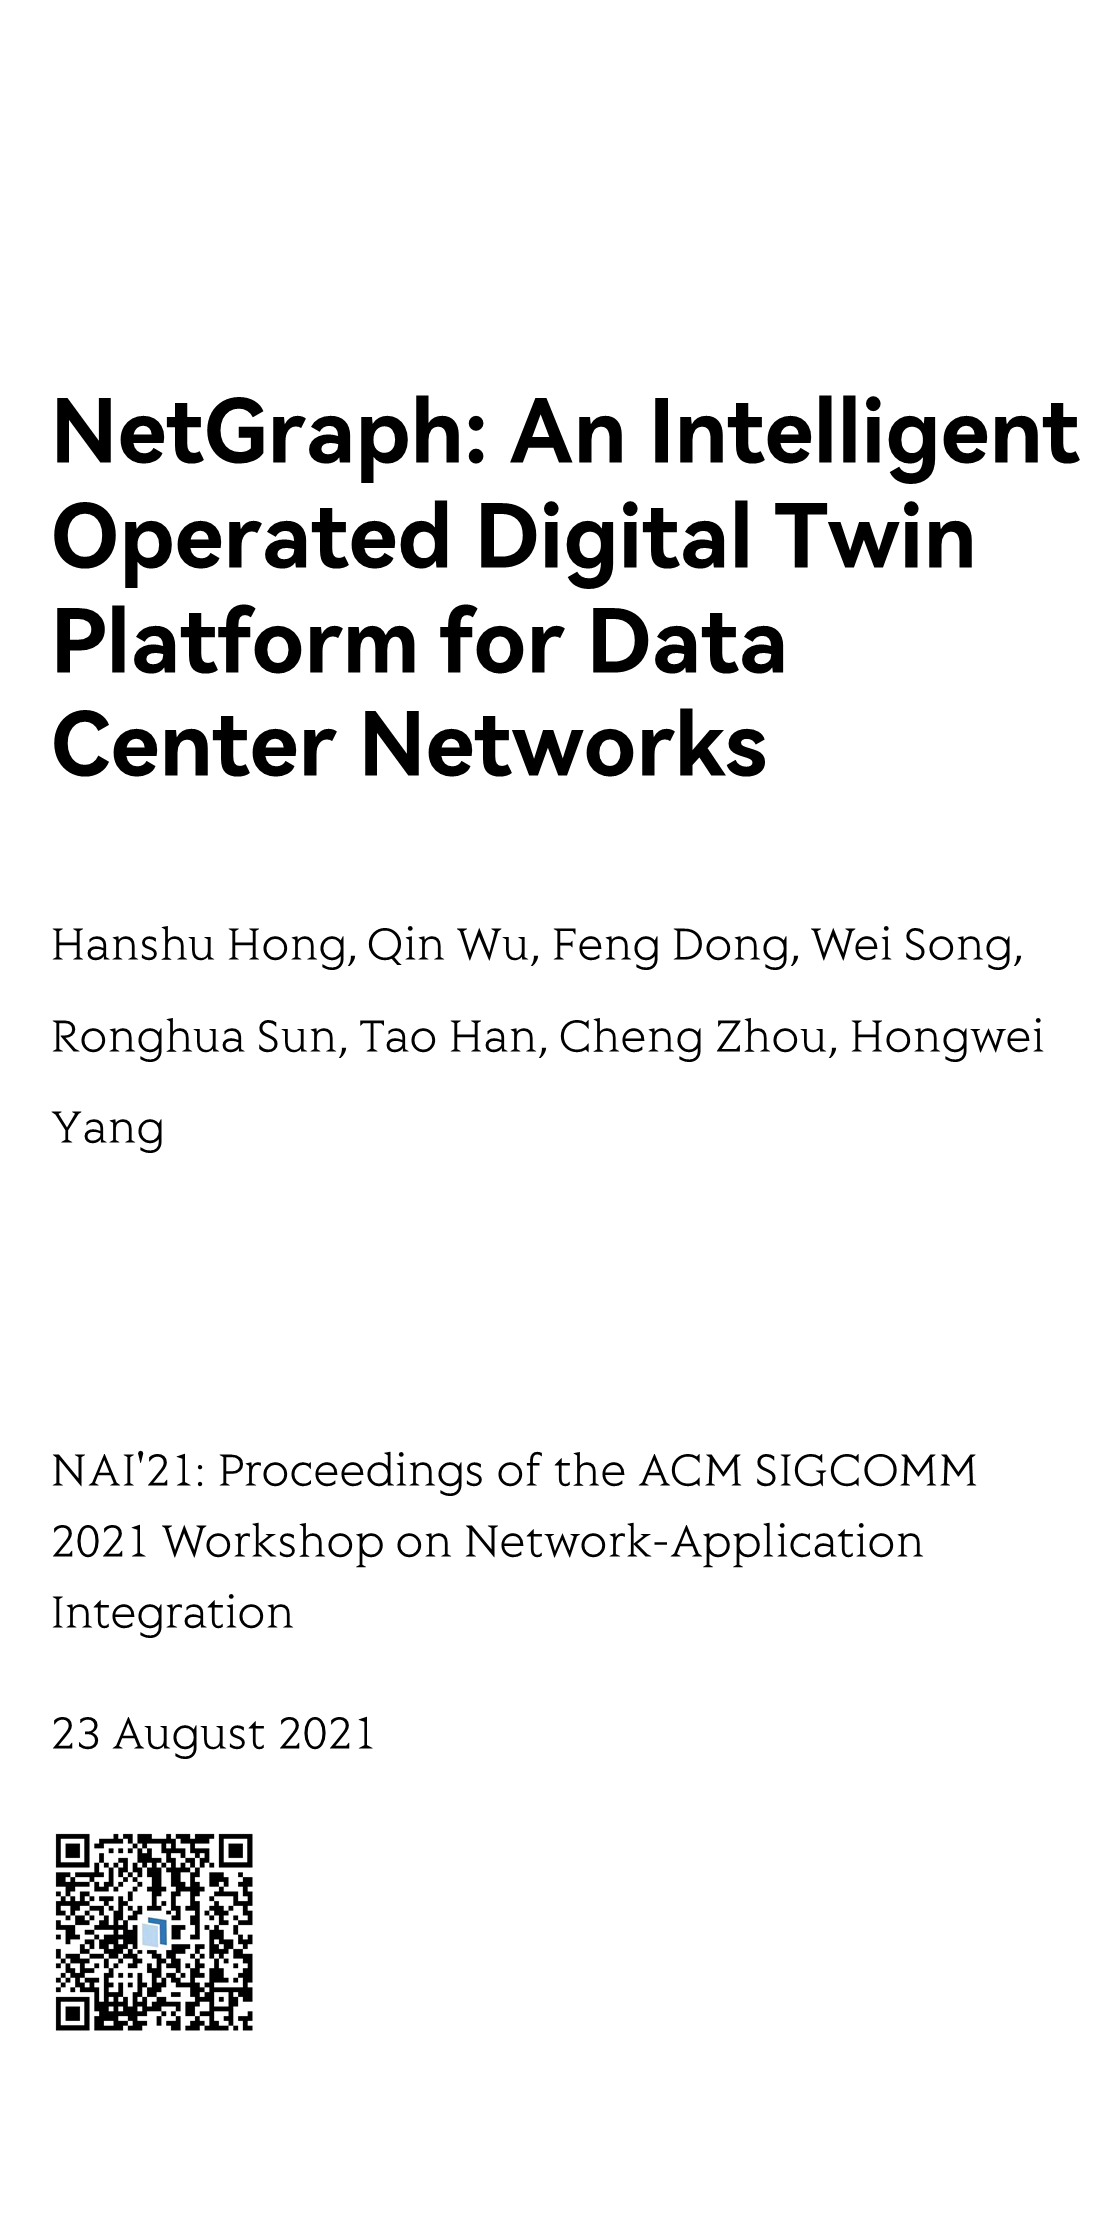 NetGraph: An Intelligent Operated Digital Twin Platform for Data Center Networks_1